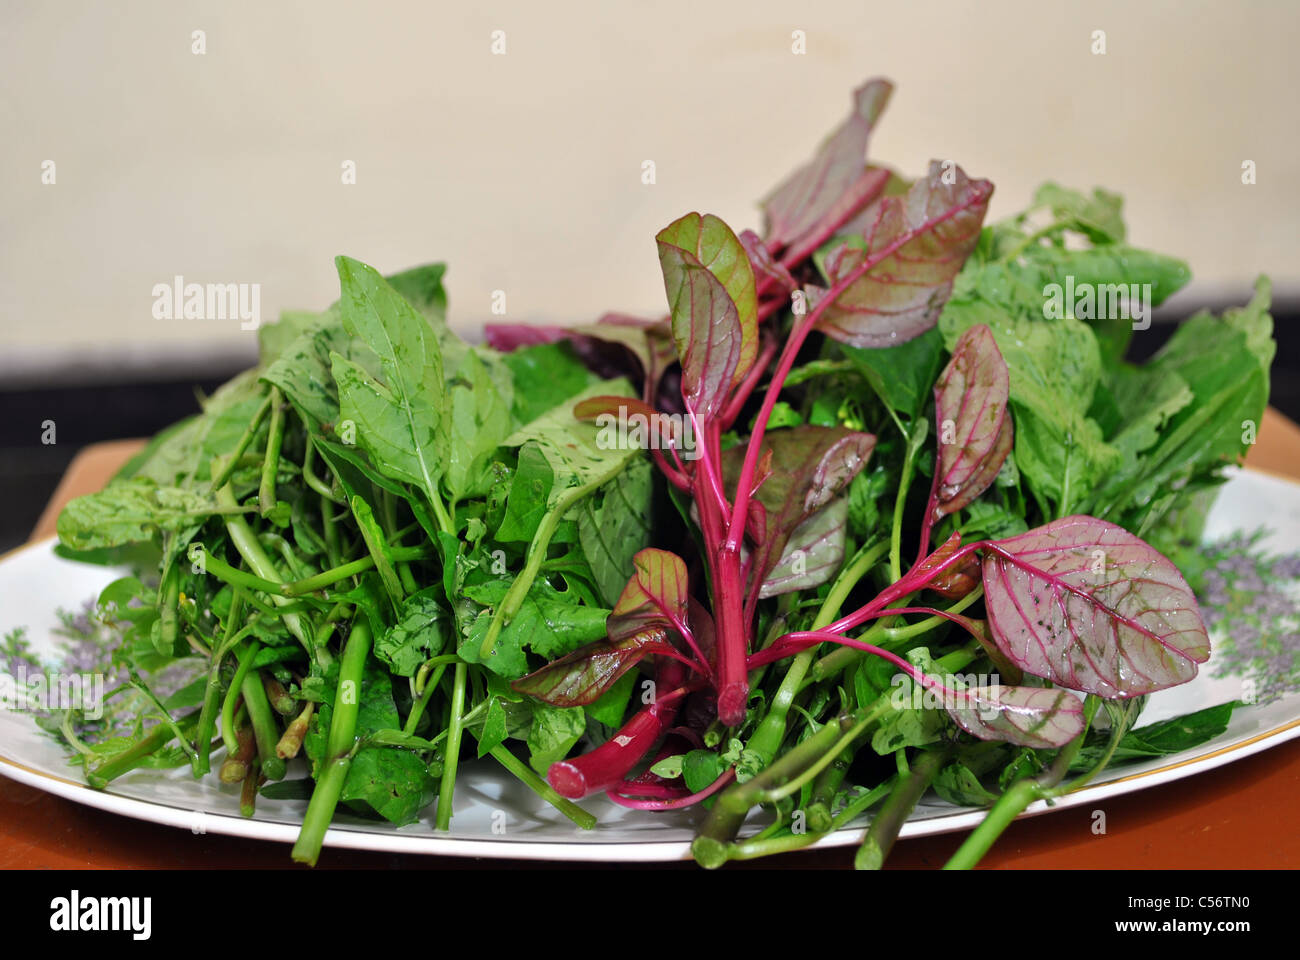 An assortment of green leafy vegetables on a platter Stock Photo